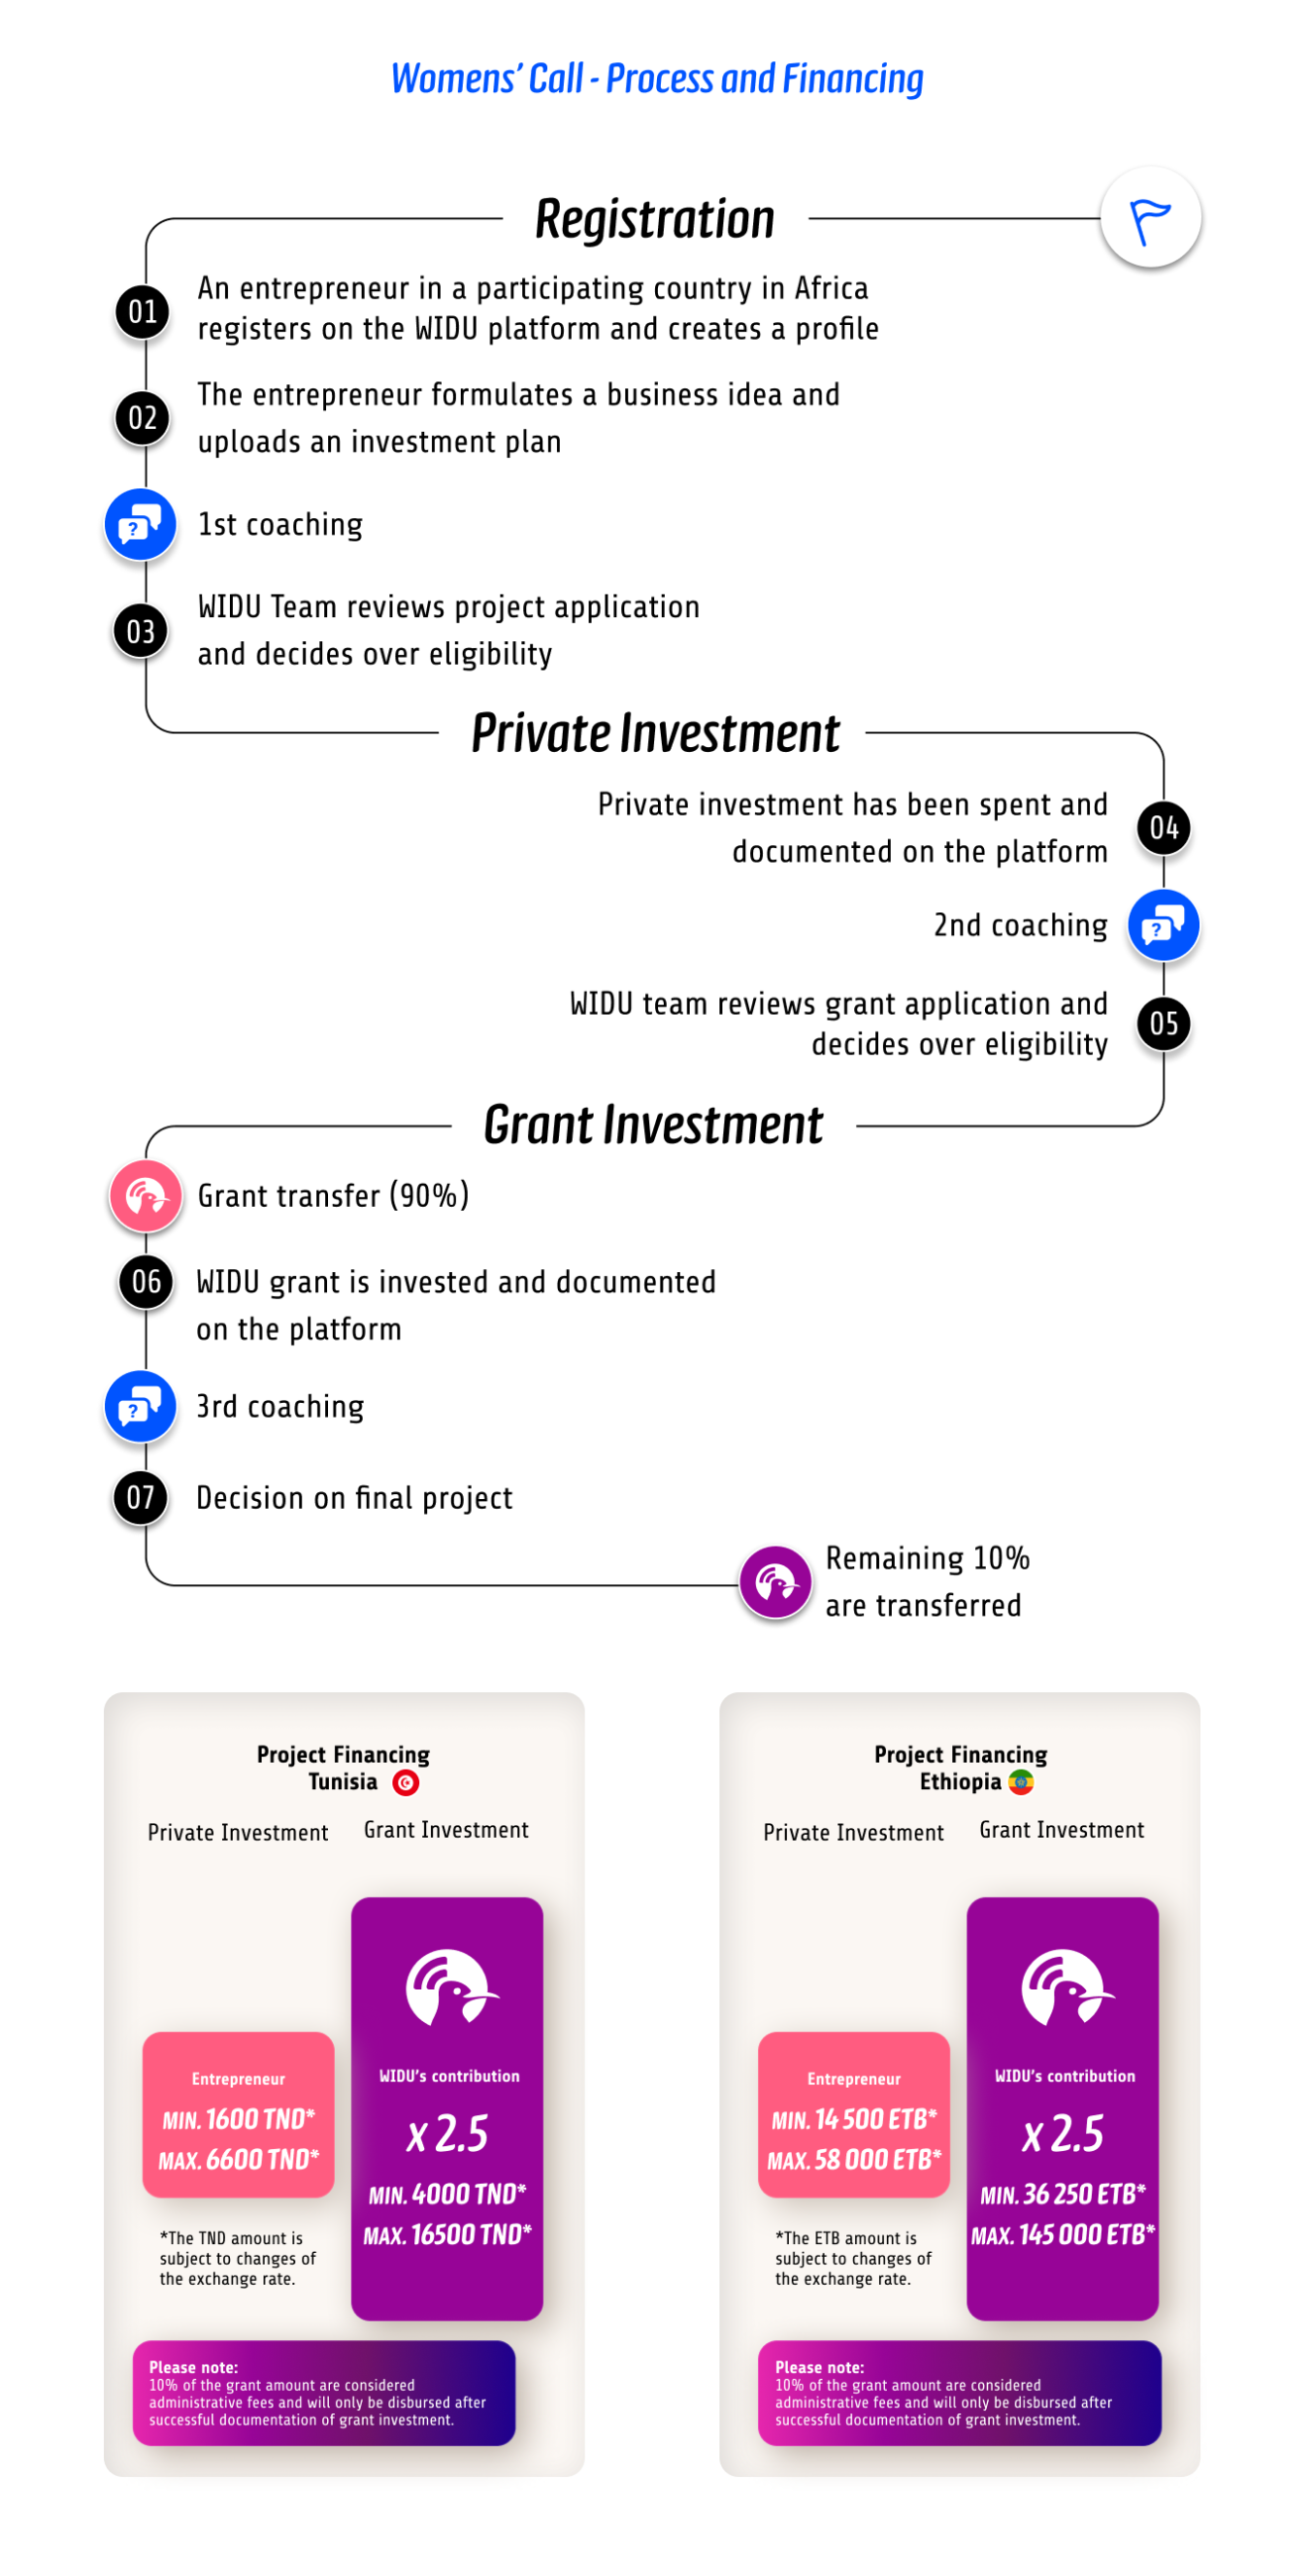 Overview of the WIDU process and Financing